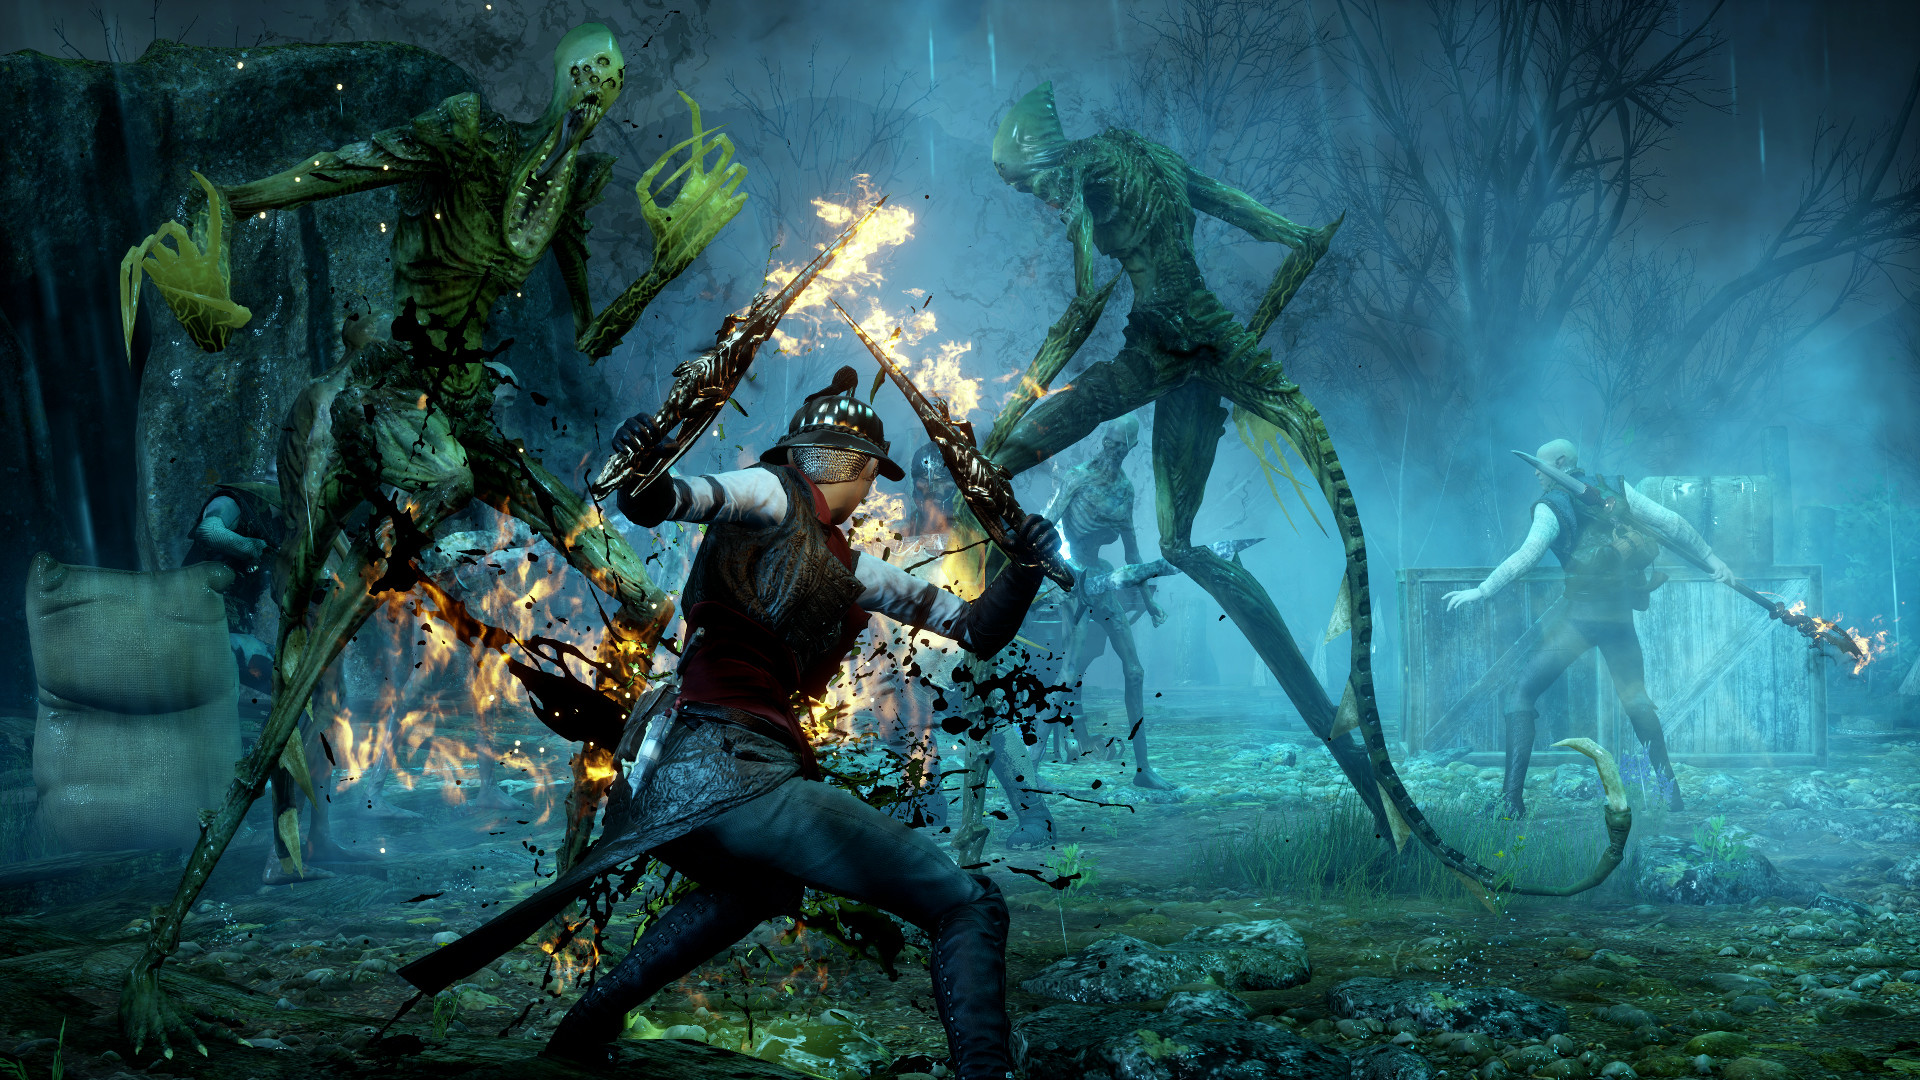 Save 80% on Dragon Age™ Inquisition on Steam